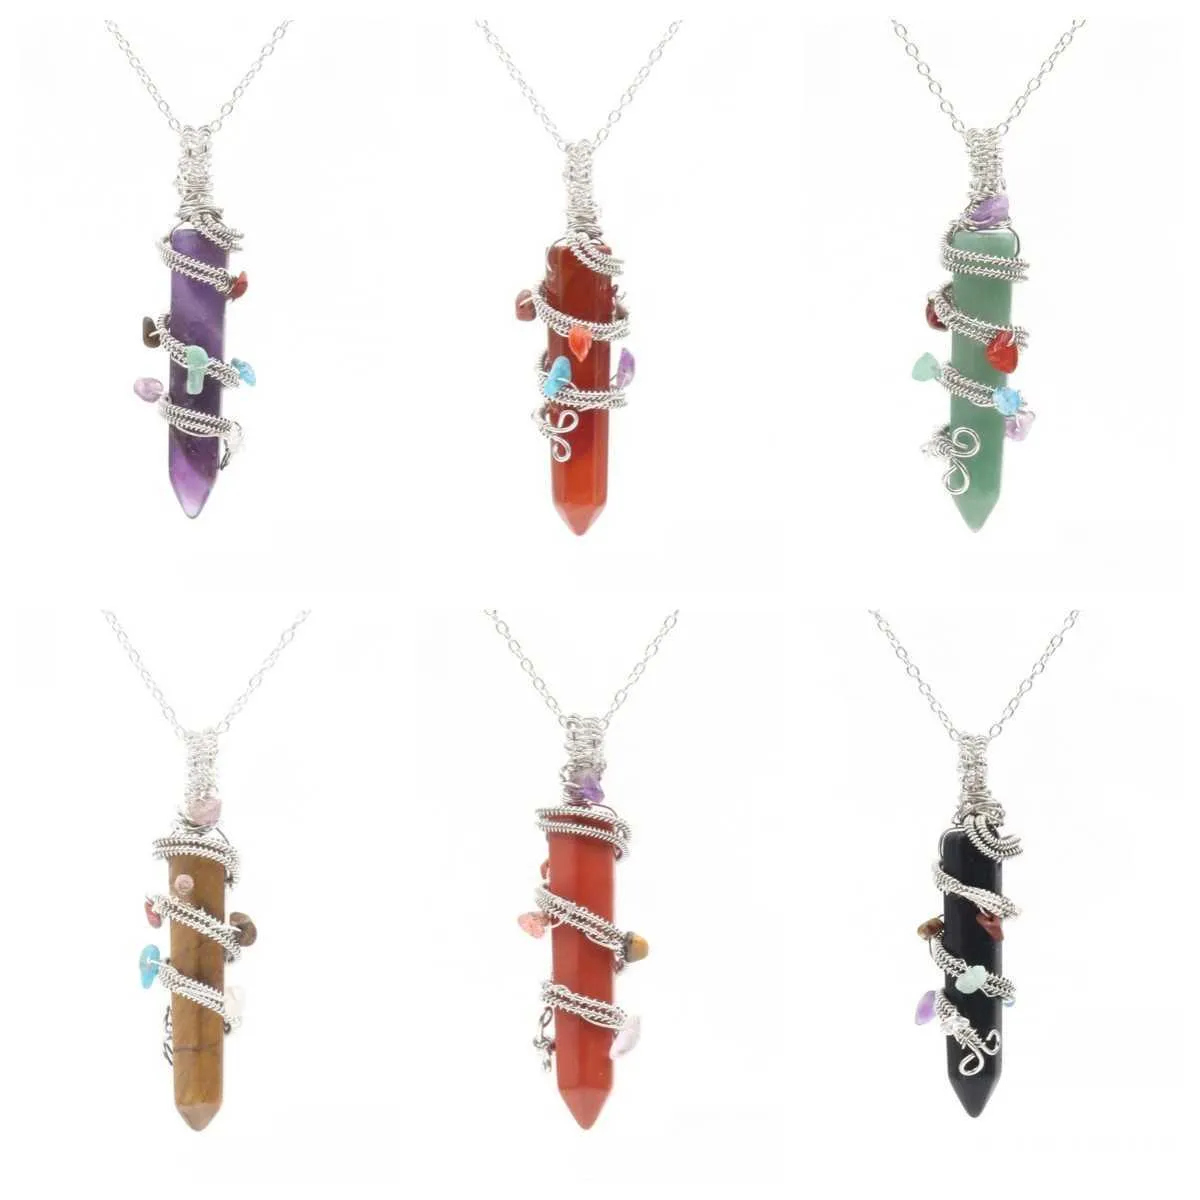 Hexagonal Crystal Point Pendant Necklace Wire Wrapped 7 Chakra Stone Healing Reiki Jewelry For Women